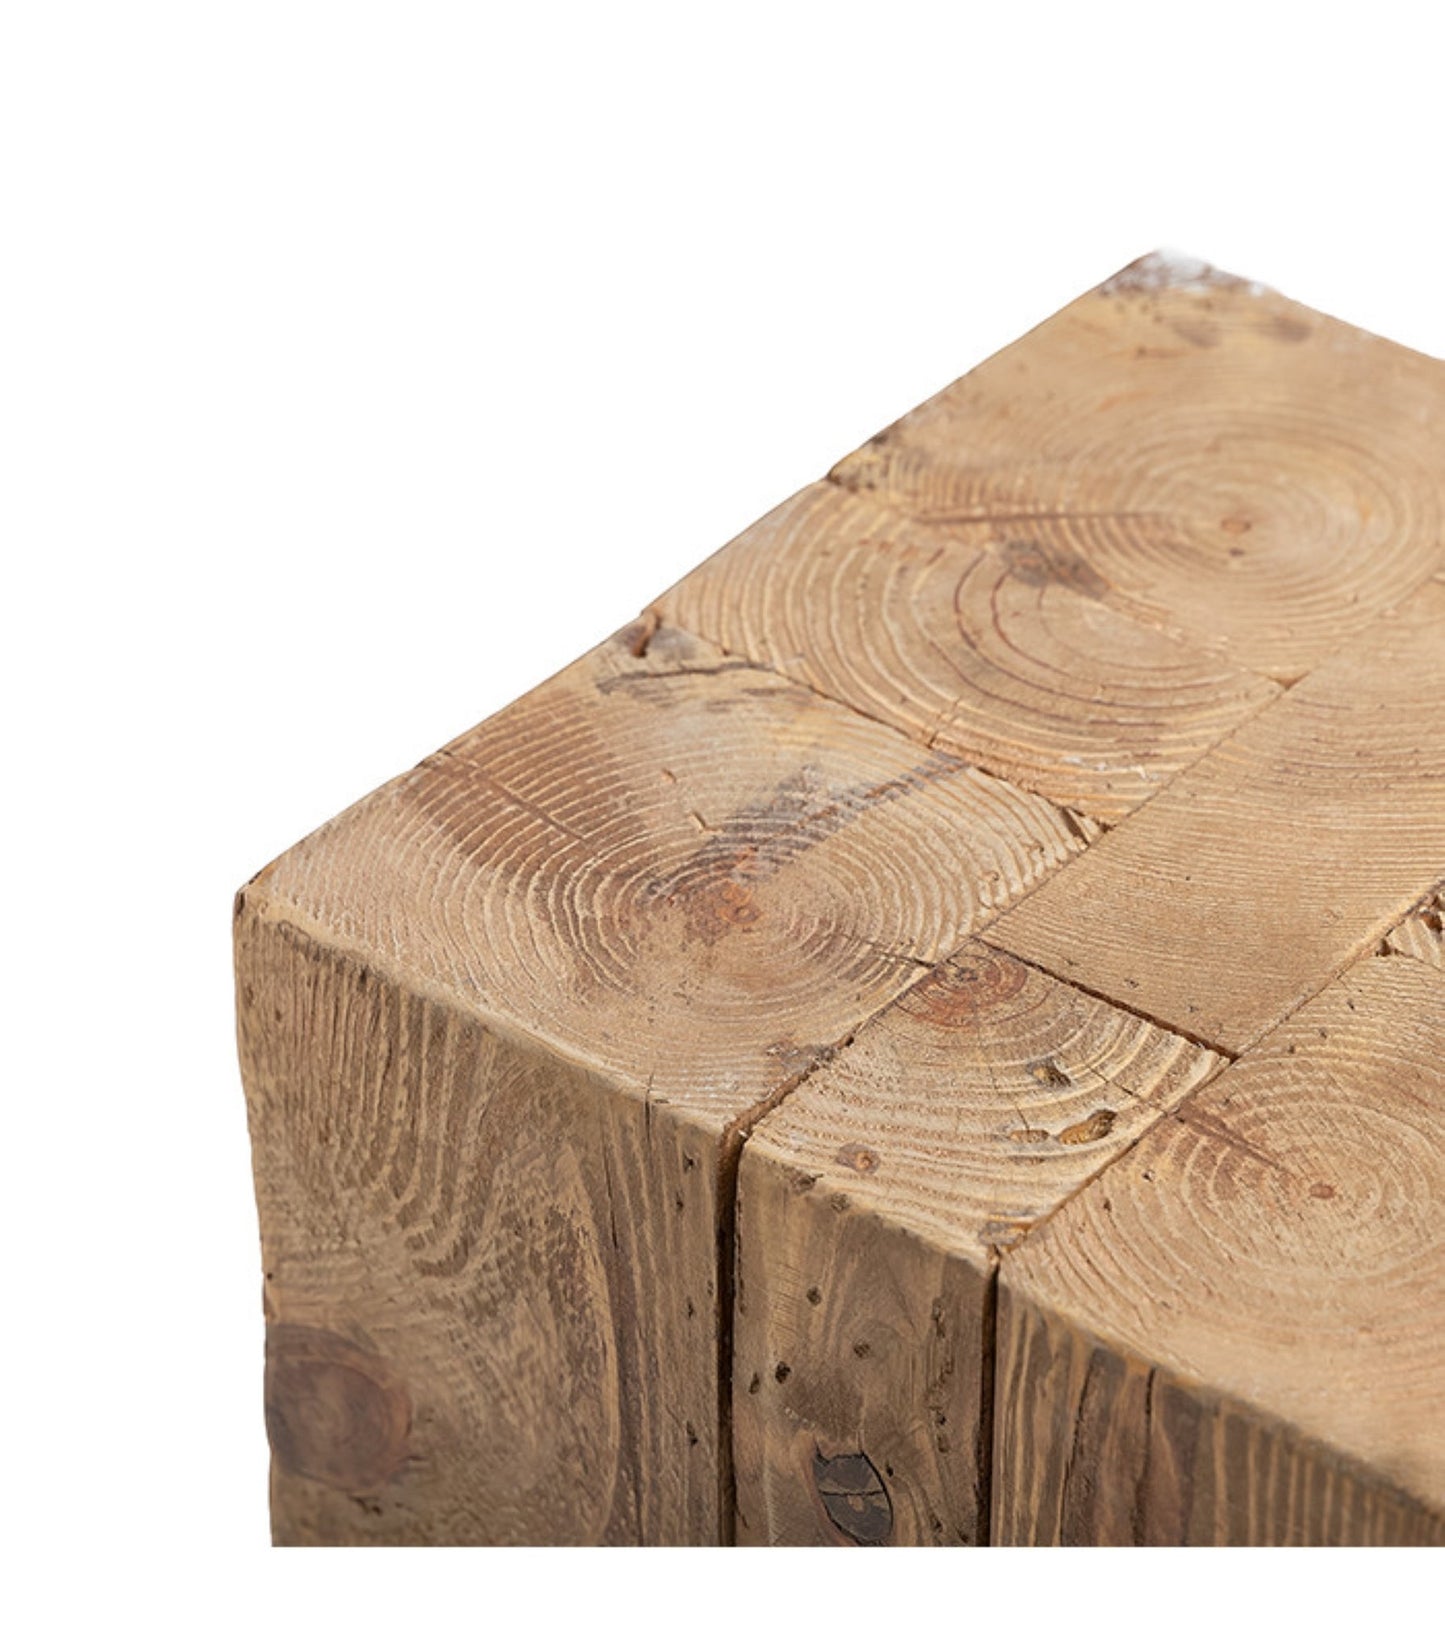 14% Off, Recycled Wooden Ottoman Stool